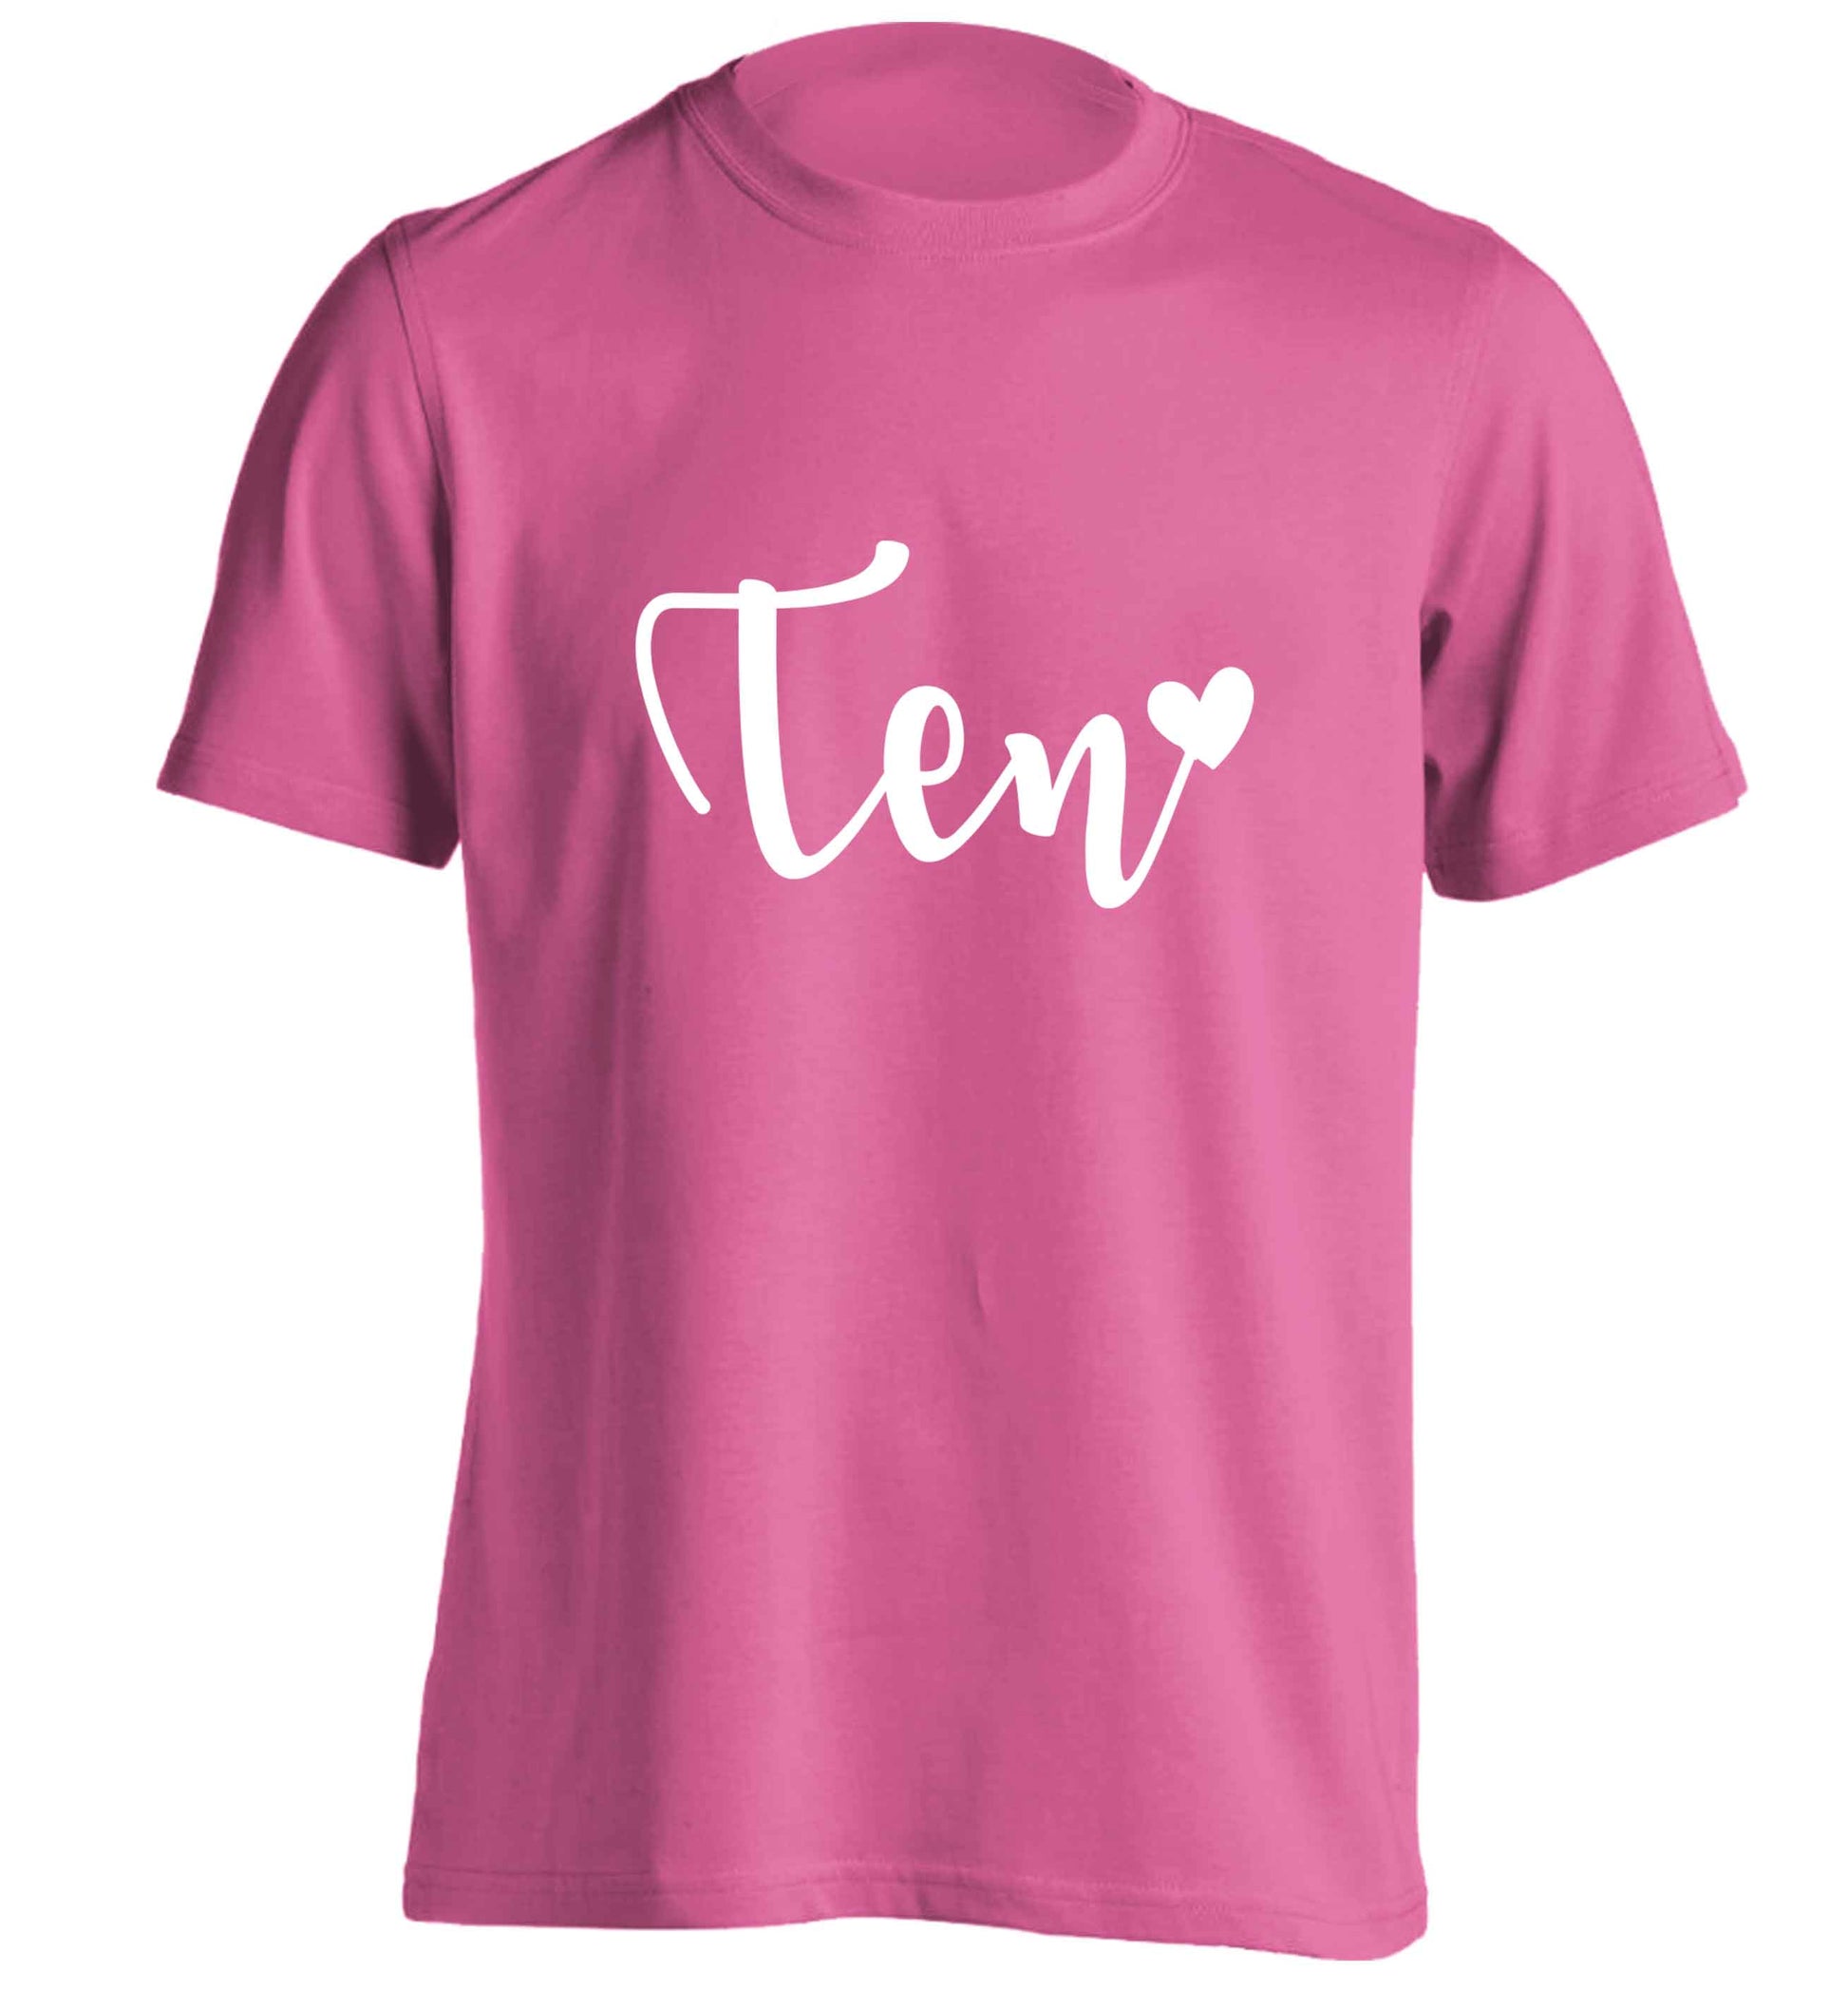 Rose gold eleven adults unisex pink Tshirt 2XL